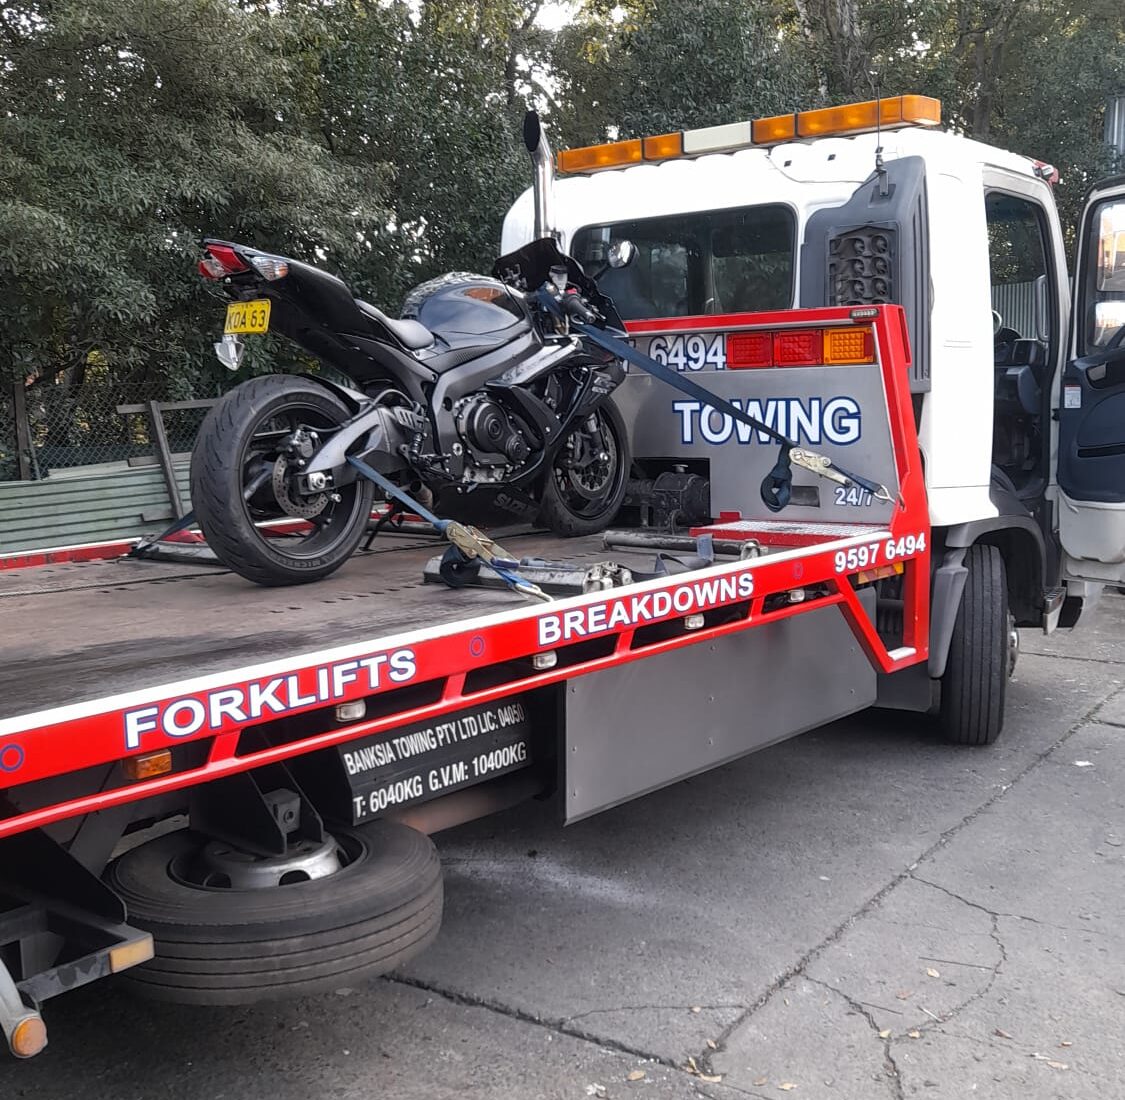 Tow Trucks in Sydney, Get reliable bike towing service in Sydney. Our professional team is here to assist you with motorcycle towing services. Contact Banksia today